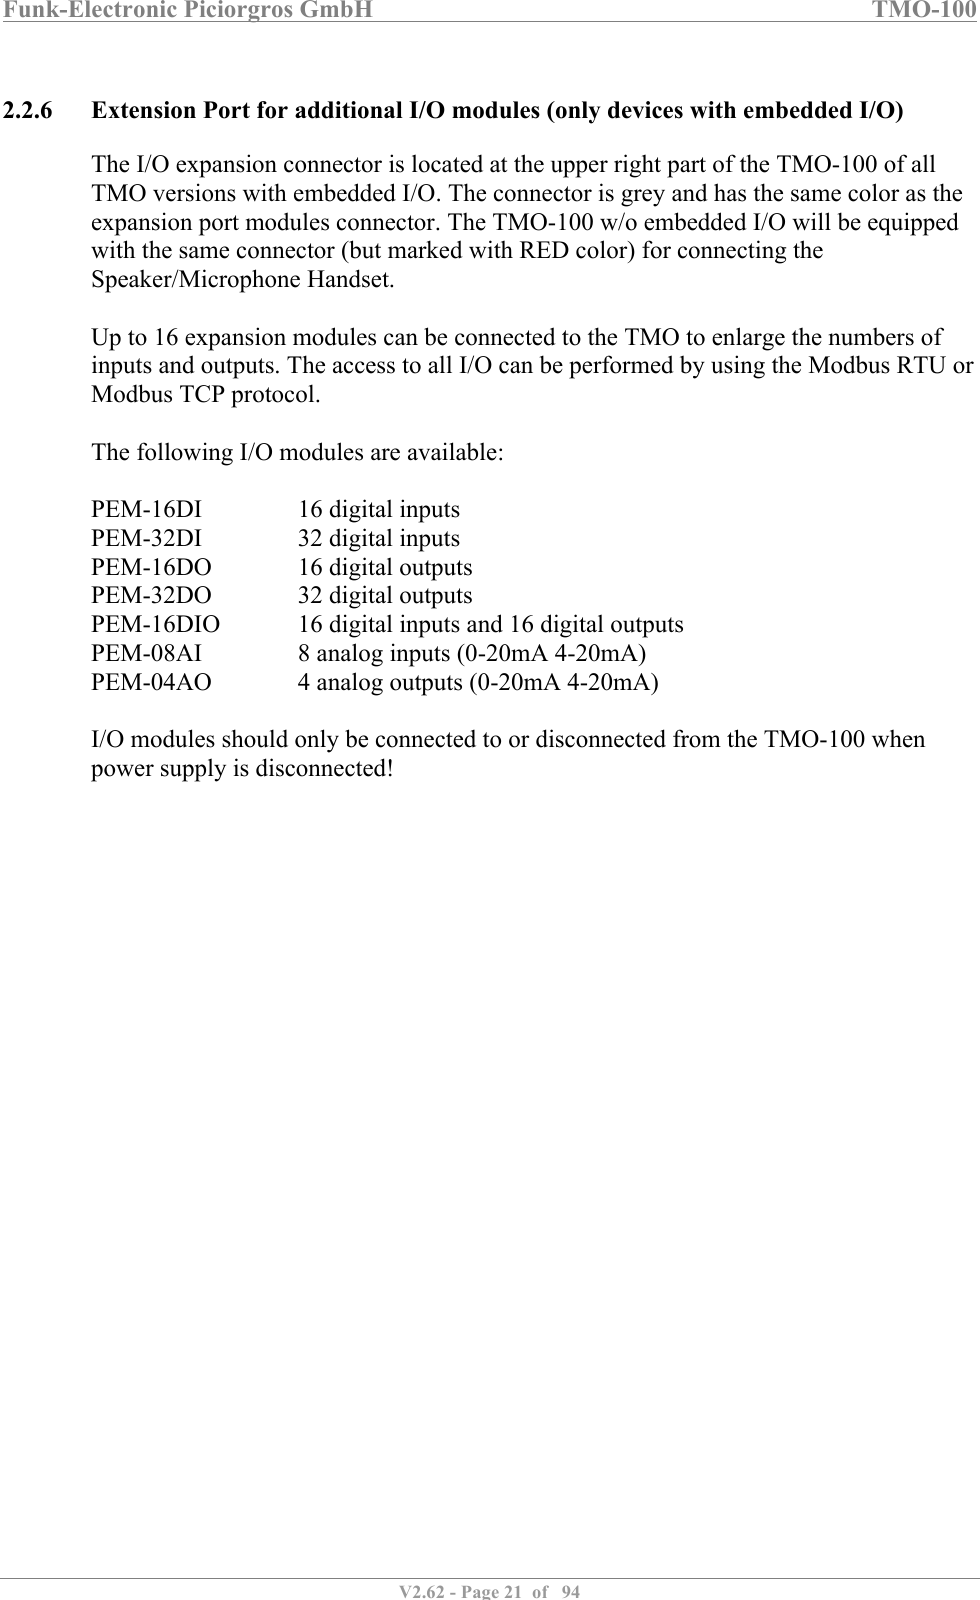 Funk-Electronic Piciorgros GmbH   TMO-100   V2.62 - Page 21  of   94   2.2.6 Extension Port for additional I/O modules (only devices with embedded I/O) The I/O expansion connector is located at the upper right part of the TMO-100 of all TMO versions with embedded I/O. The connector is grey and has the same color as the expansion port modules connector. The TMO-100 w/o embedded I/O will be equipped with the same connector (but marked with RED color) for connecting the Speaker/Microphone Handset.  Up to 16 expansion modules can be connected to the TMO to enlarge the numbers of inputs and outputs. The access to all I/O can be performed by using the Modbus RTU or Modbus TCP protocol.  The following I/O modules are available:  PEM-16DI    16 digital inputs PEM-32DI    32 digital inputs PEM-16DO    16 digital outputs PEM-32DO    32 digital outputs PEM-16DIO   16 digital inputs and 16 digital outputs PEM-08AI    8 analog inputs (0-20mA 4-20mA) PEM-04AO    4 analog outputs (0-20mA 4-20mA)  I/O modules should only be connected to or disconnected from the TMO-100 when power supply is disconnected!  